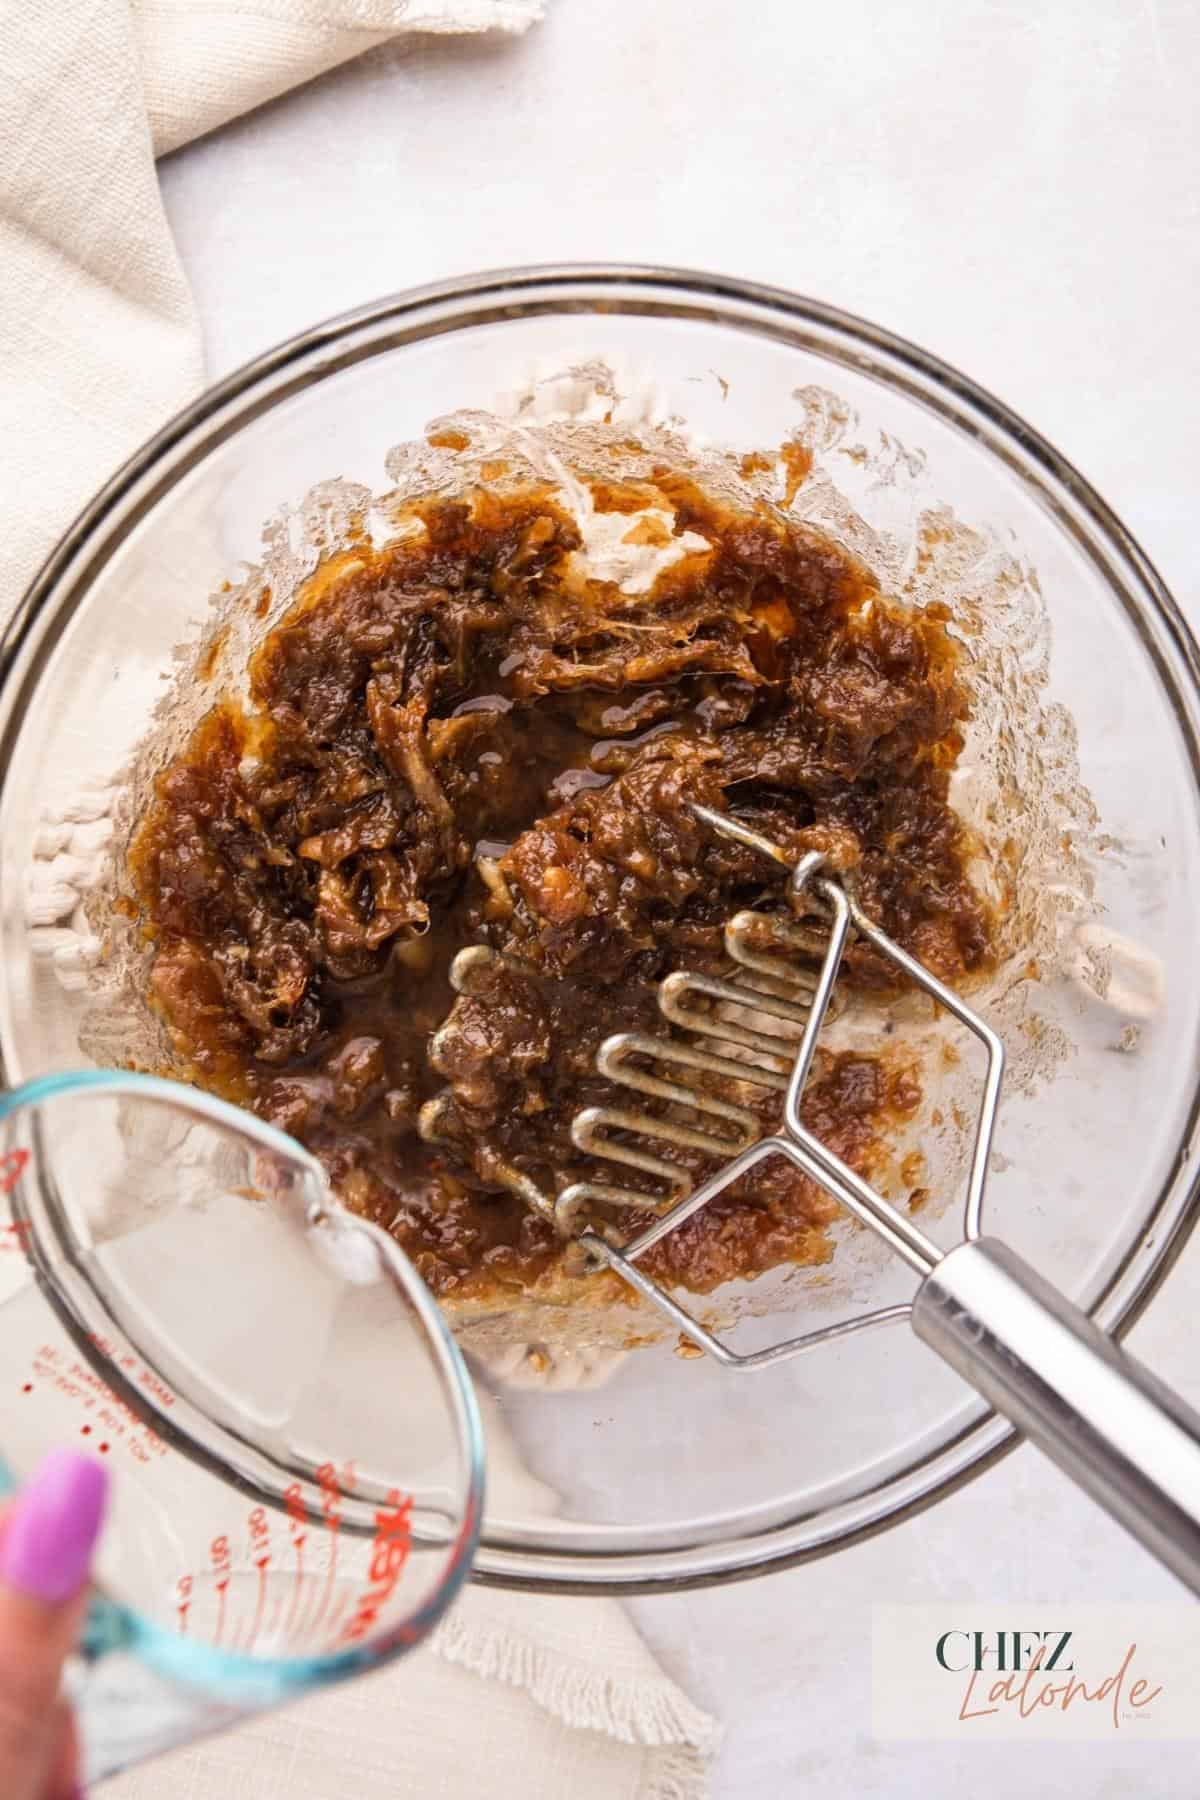 A glass bowl filled with date fillings next to a measuring cup.